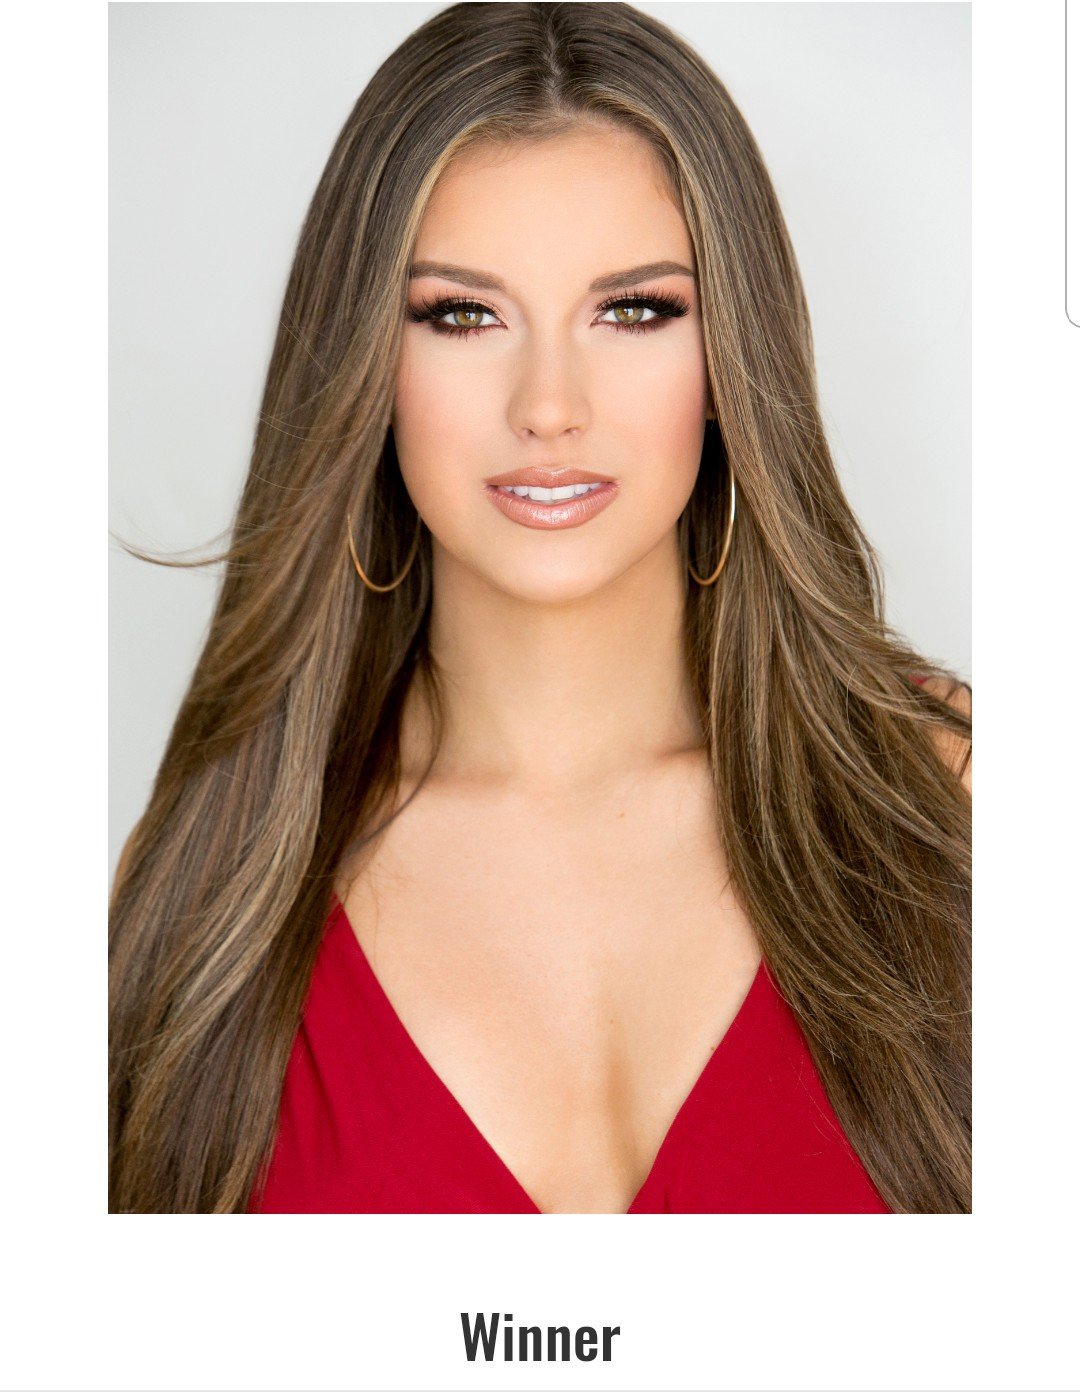 Also this women won Miss Texas USA 2019 and it's not the women in the ...